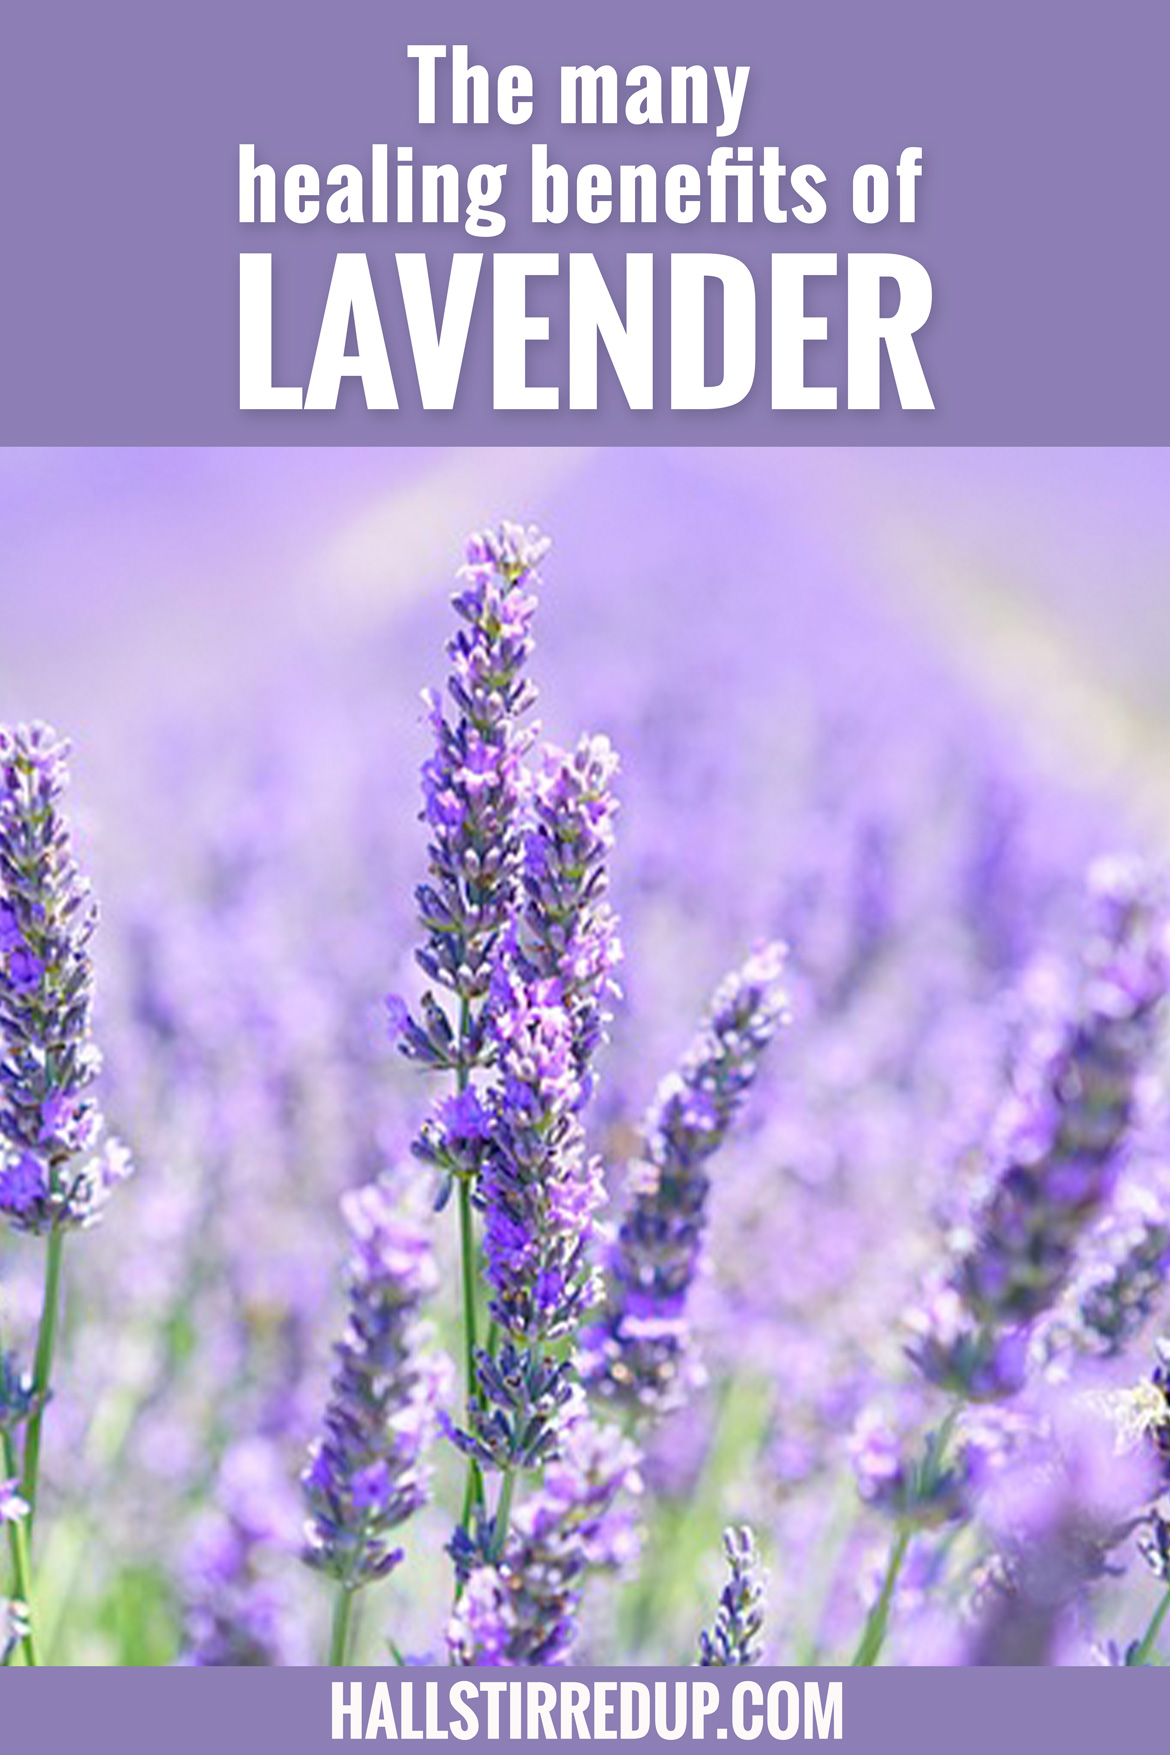 The many healing benefits of Lavender